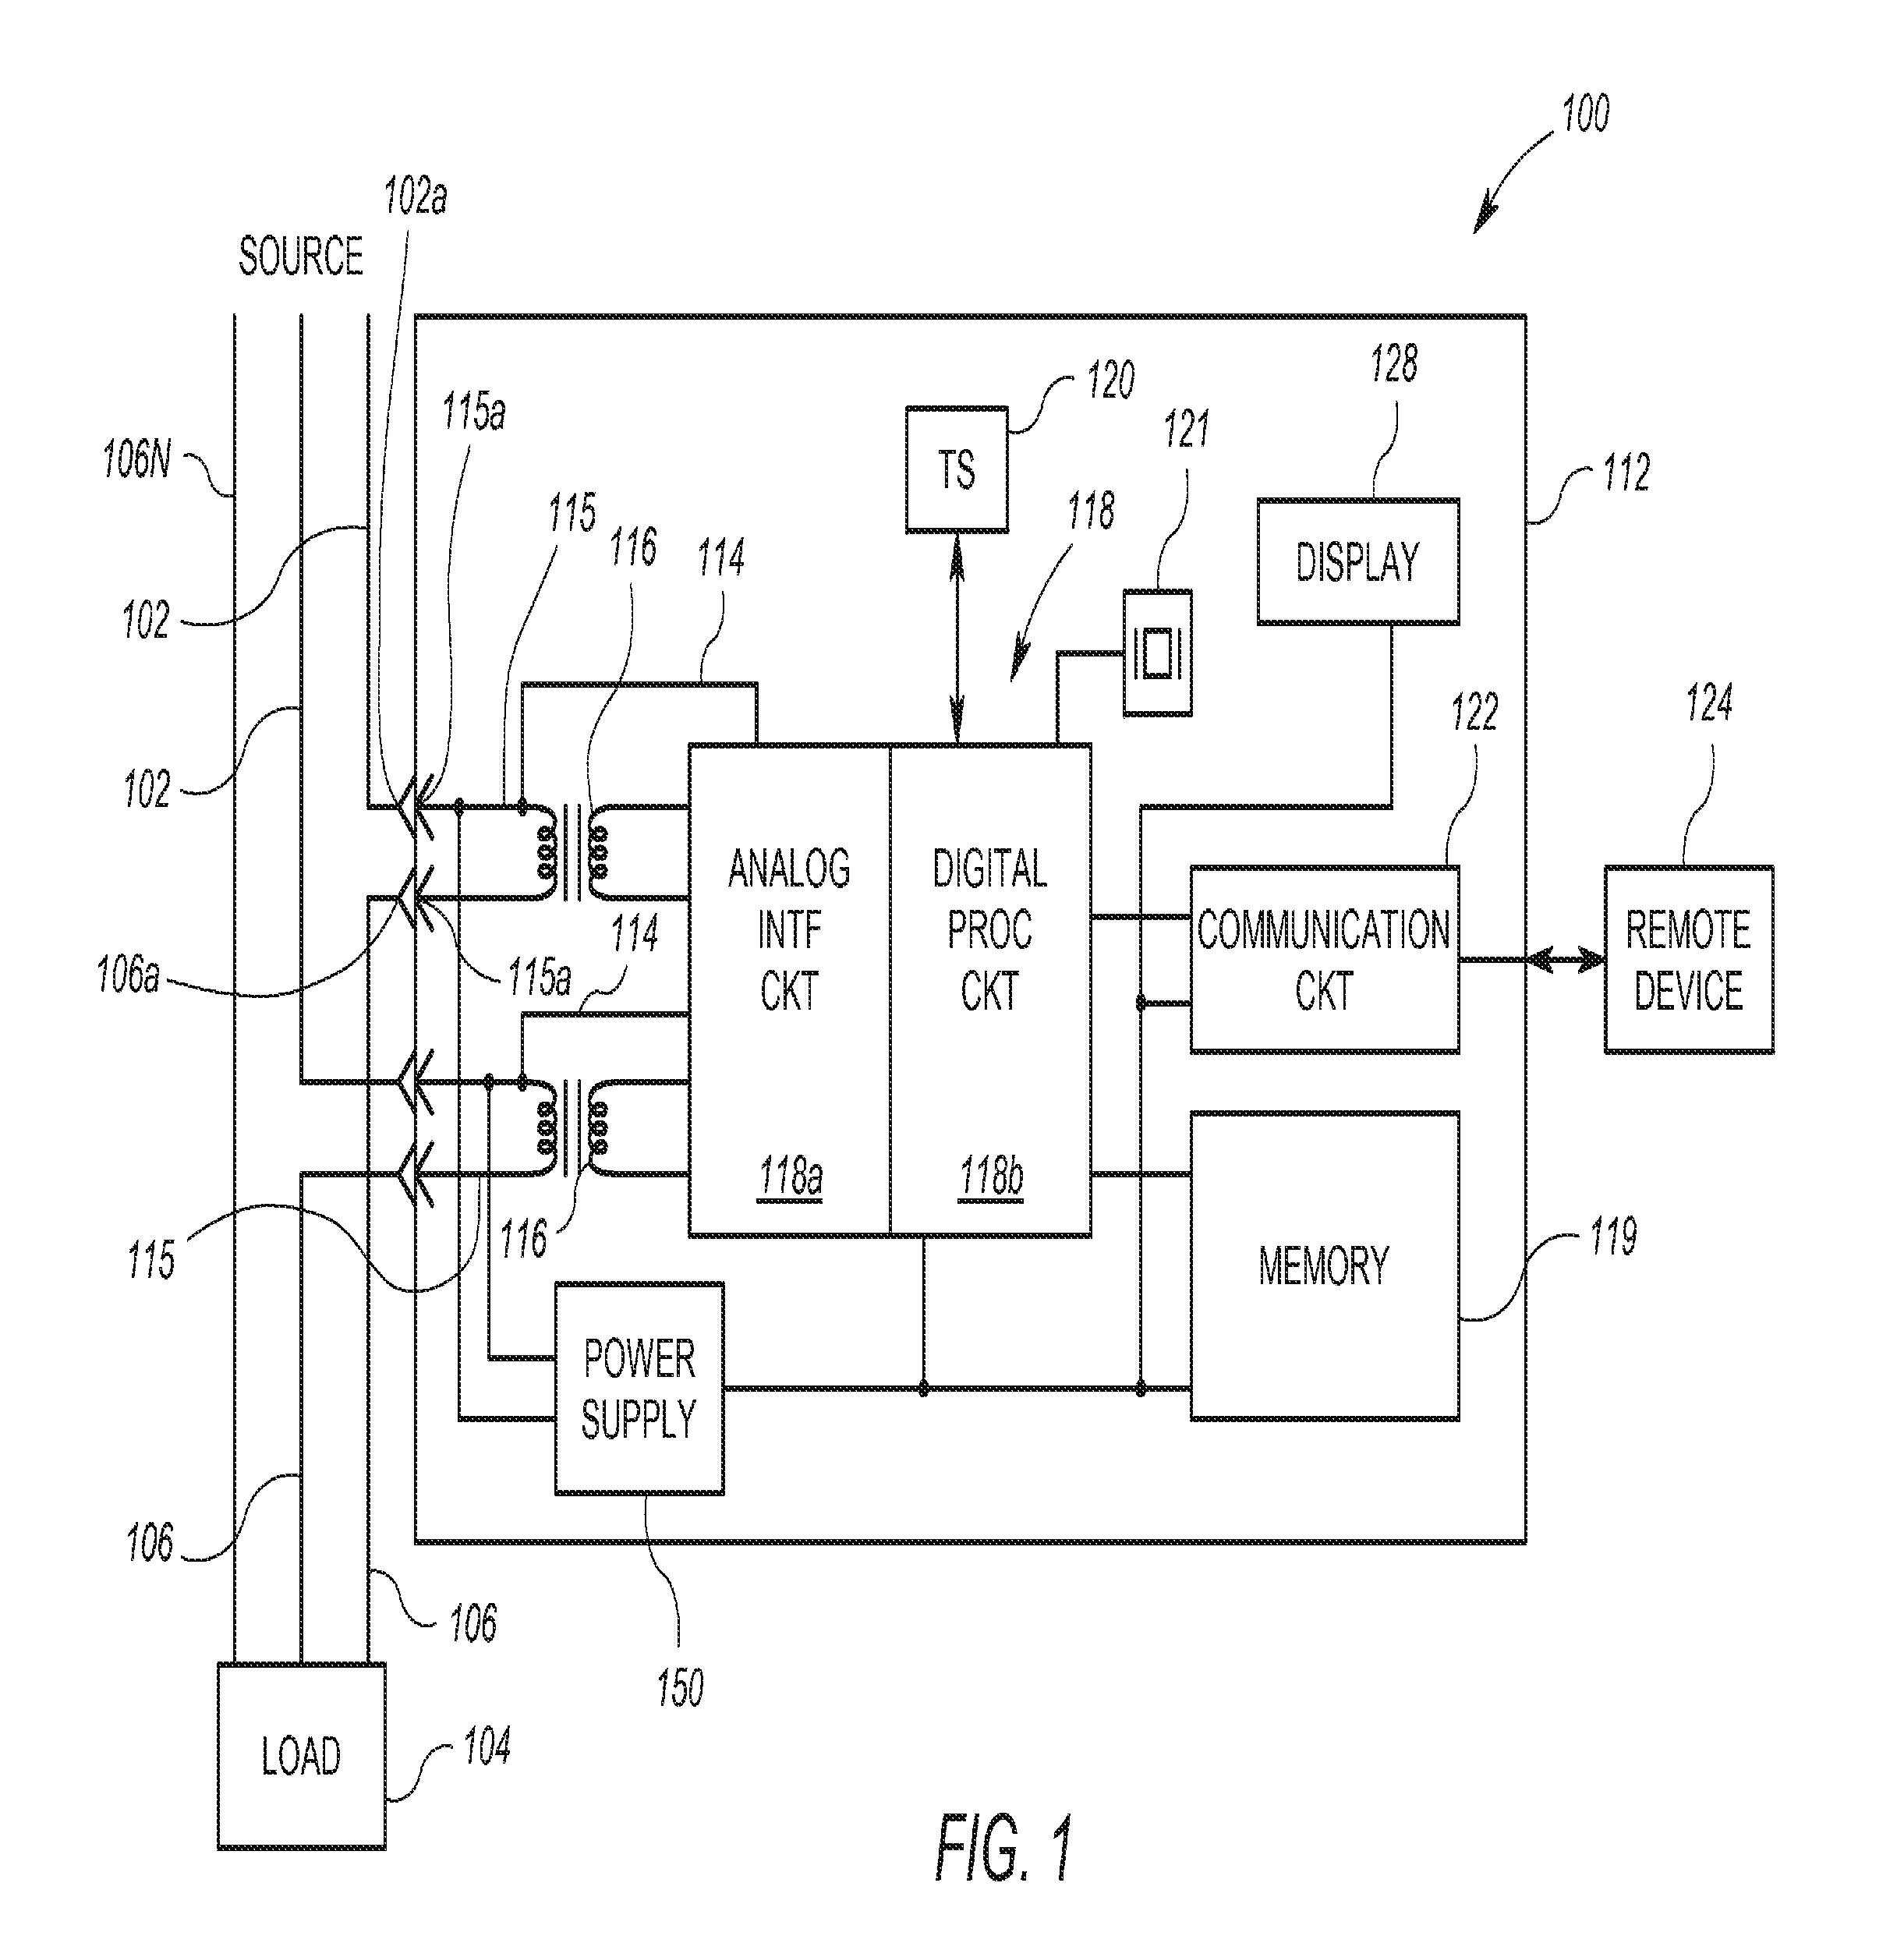 Temperature Profiling in an Electricity Meter